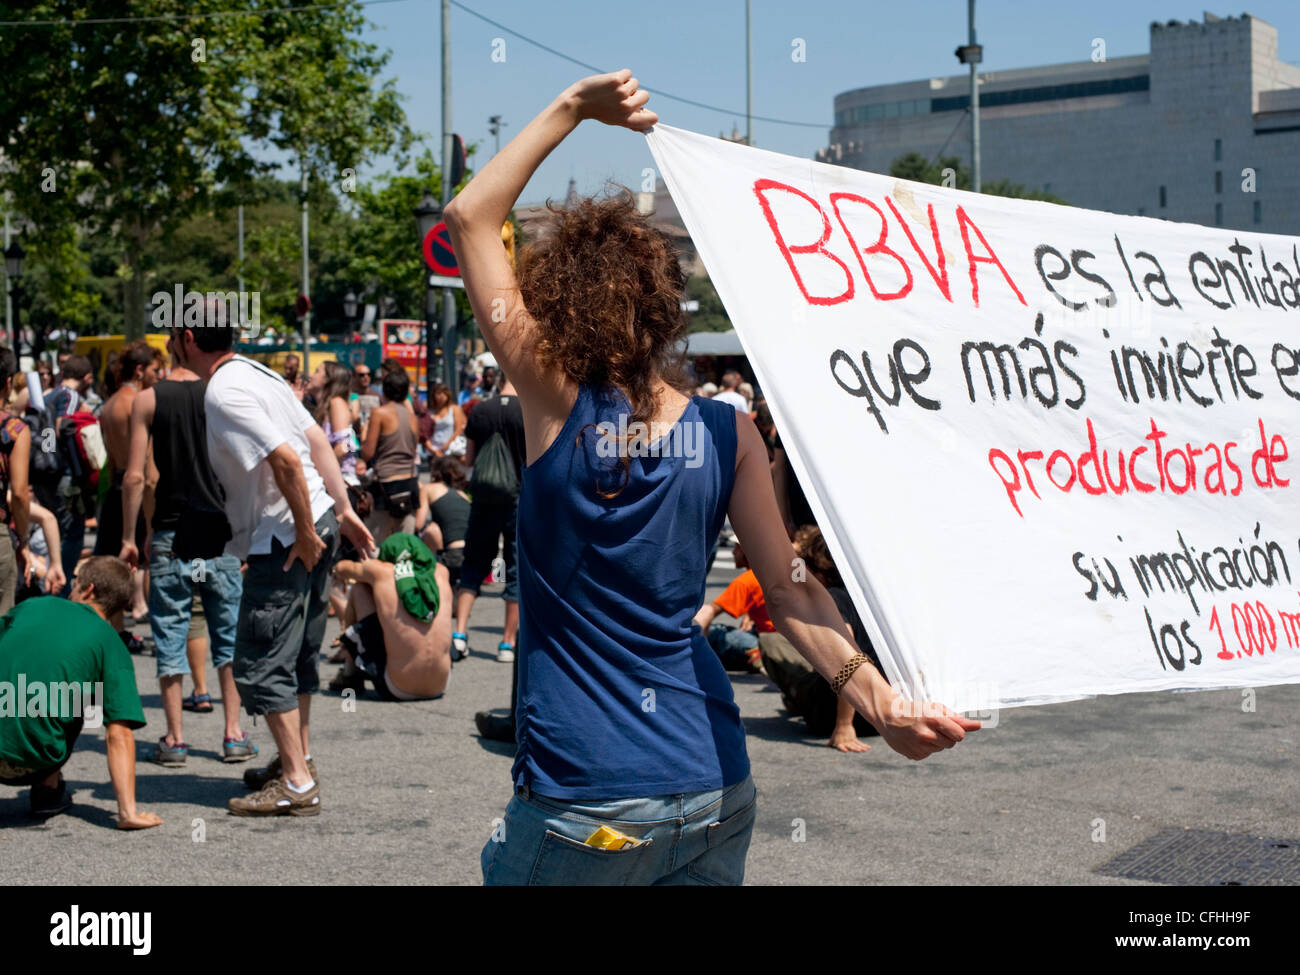 A woman protester holds up a banner at an anti-government protests on Placa de Catalunya in Barcelona in May 2011 Stock Photo